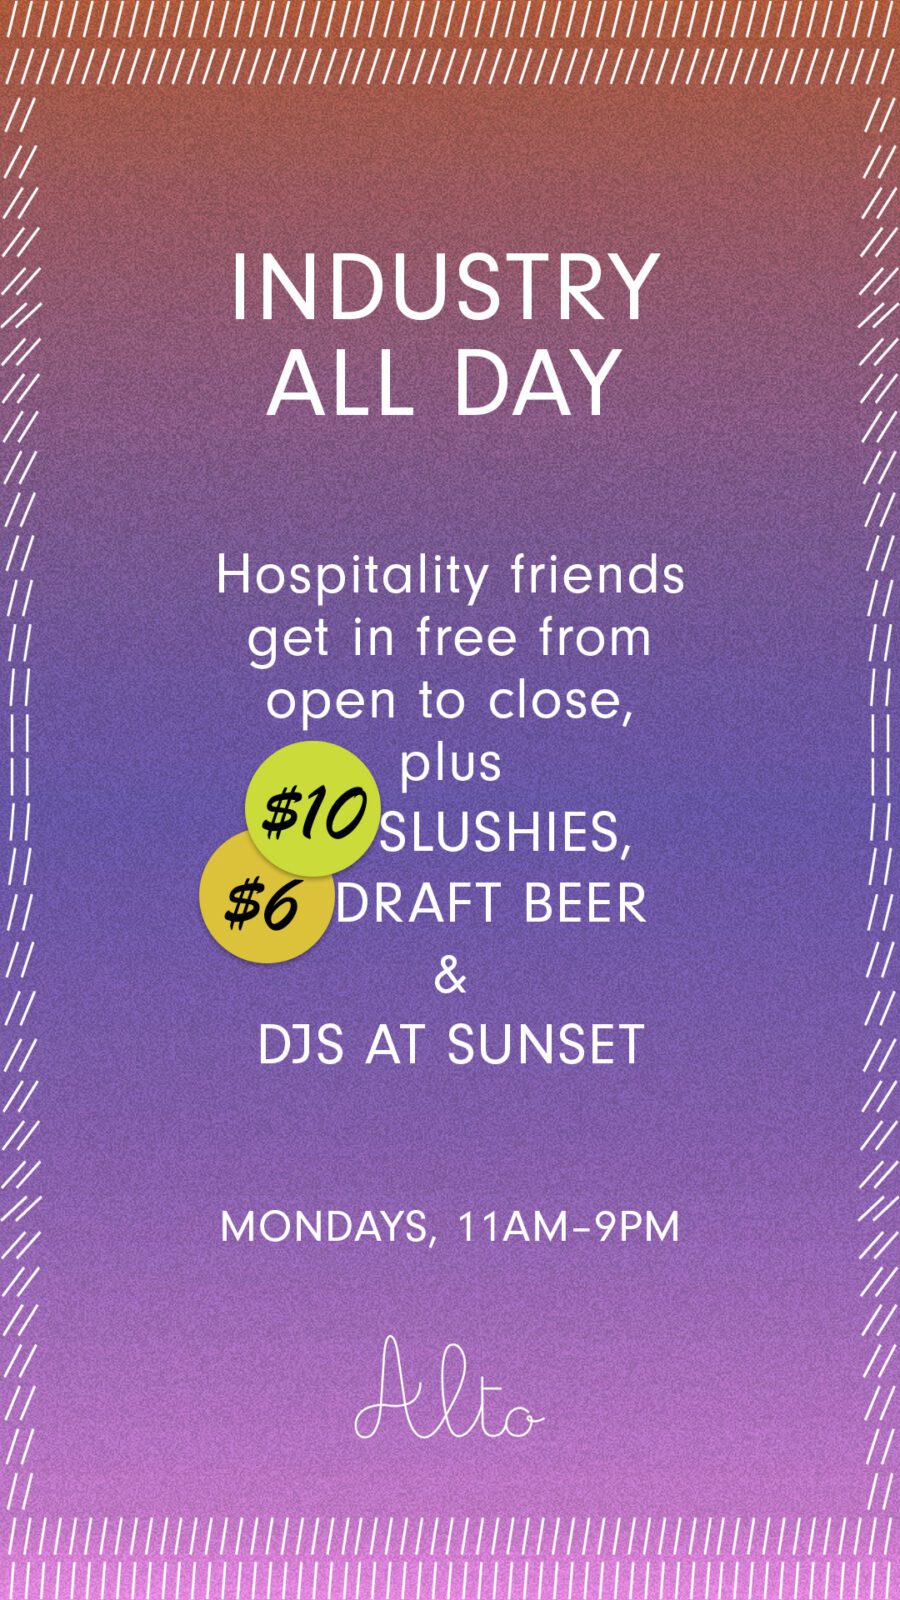 Industry All Day - Mondays at 11am